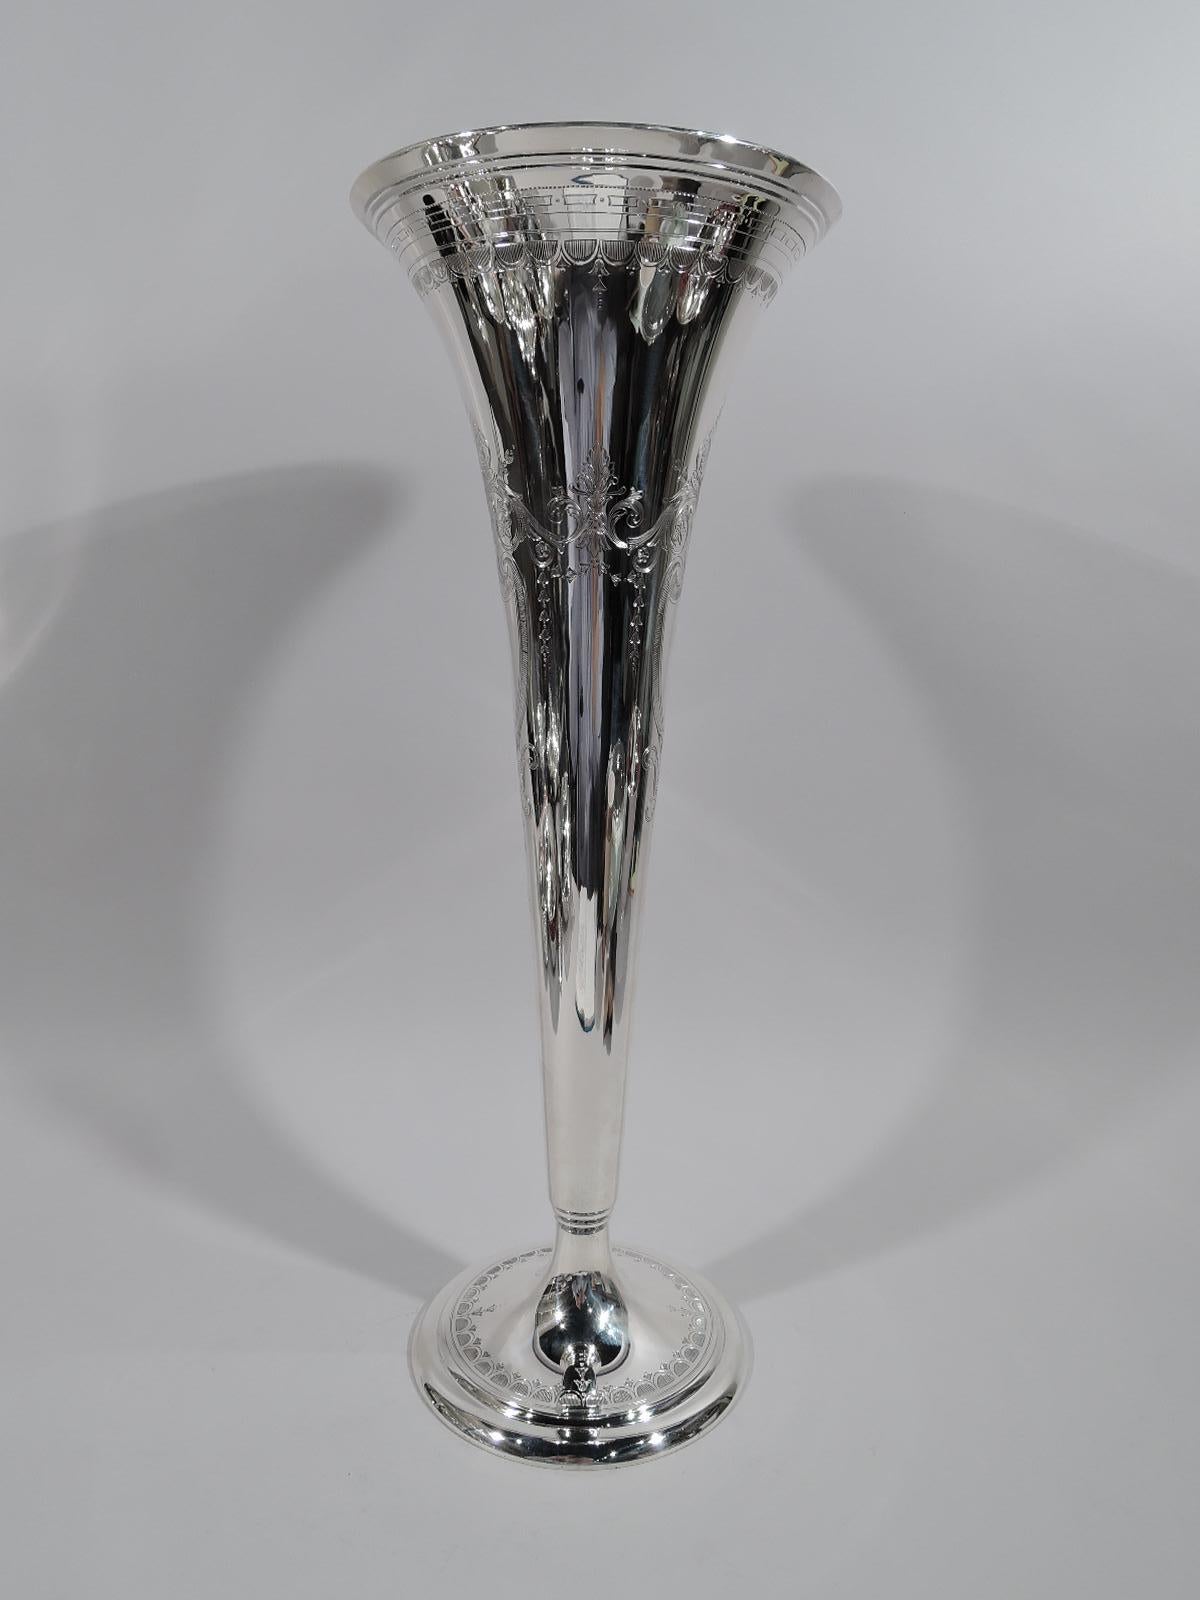 Tall sterling silver centerpiece trumpet vase. Made by Tiffany & Co. in New York, ca 1913. Conical on stepped and raised foot. On front and back engraved armorial cartouches (vacant). Stylized leaf-and-dart and block borders. A bold and Modern form